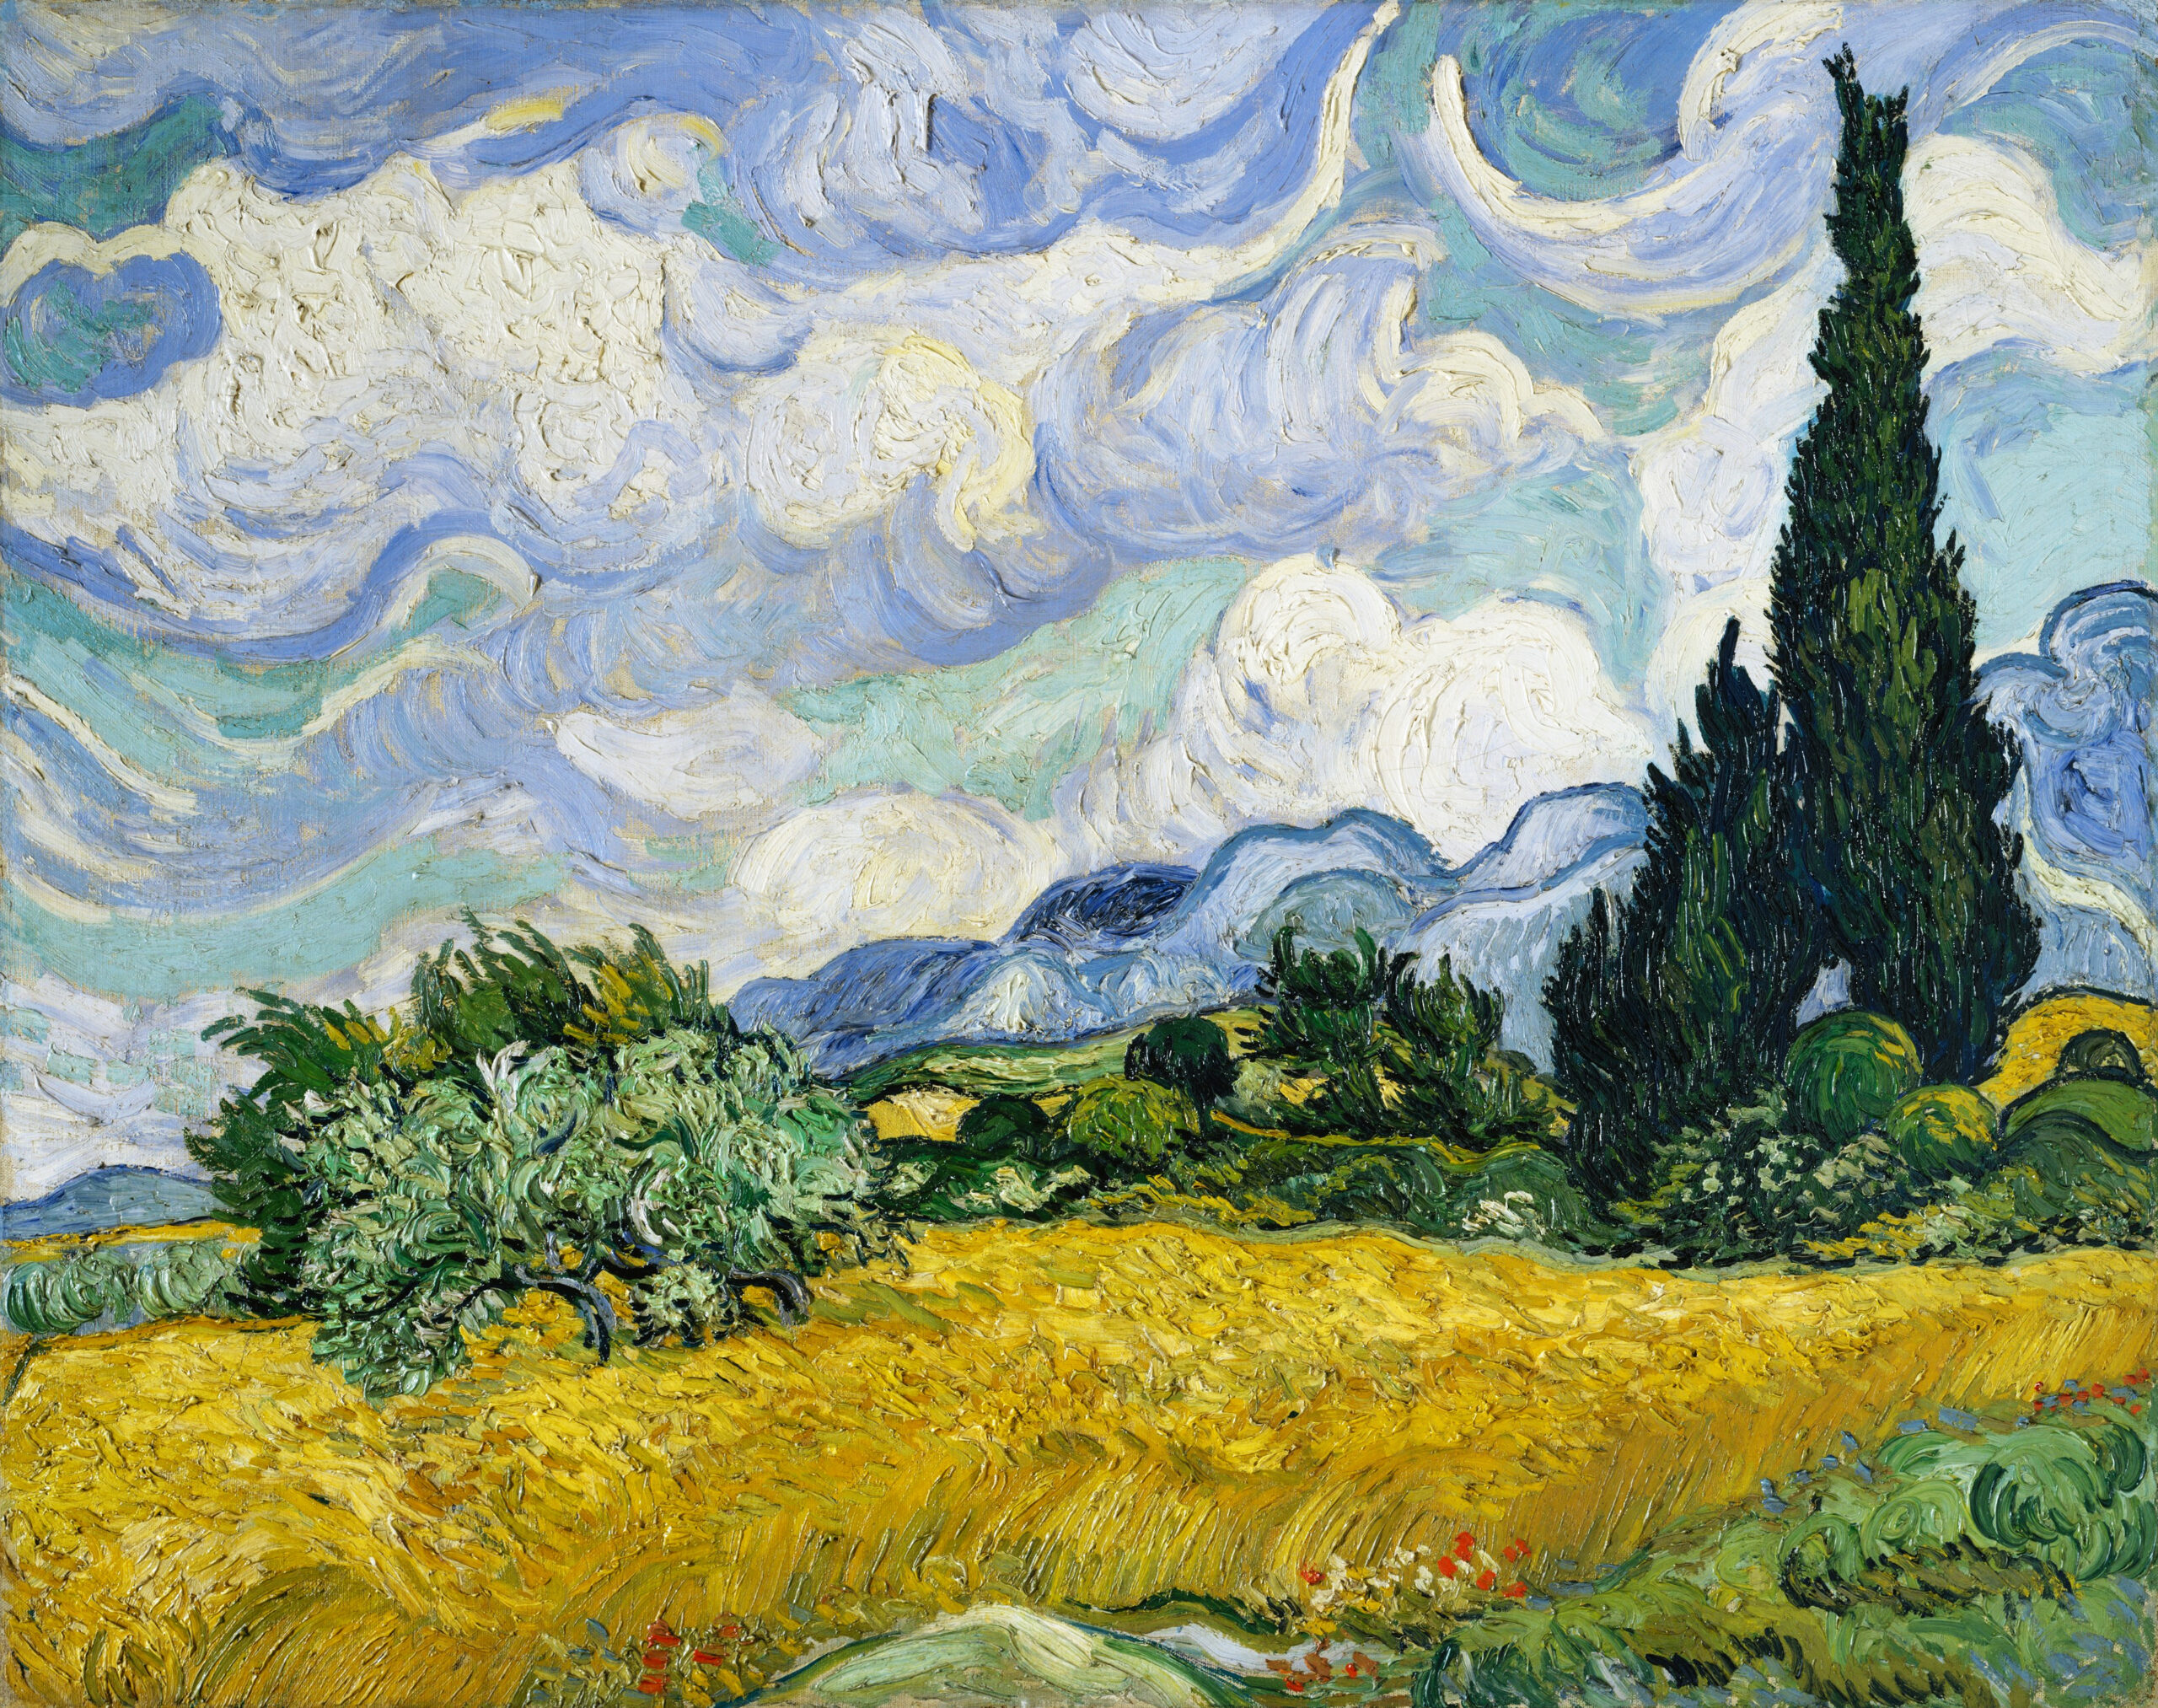 Wheat Field with Cypresses (1889) by Vincent Van Gogh. Original from the MET Museum.